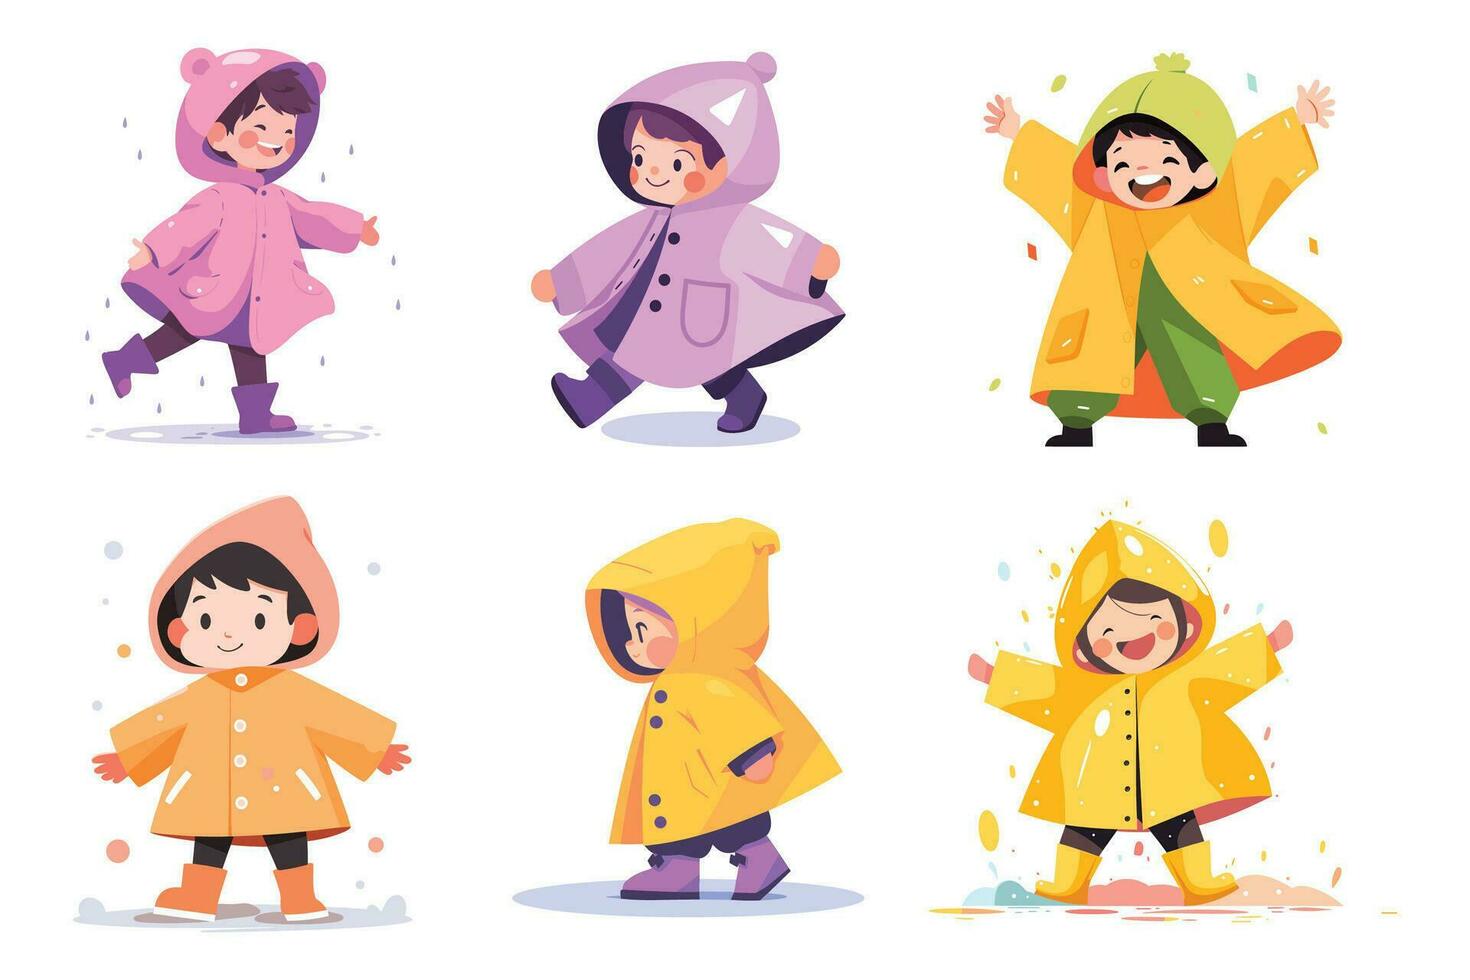 Hand Drawn A child in a raincoat showing a joyful expression that it is raining in flat style vector